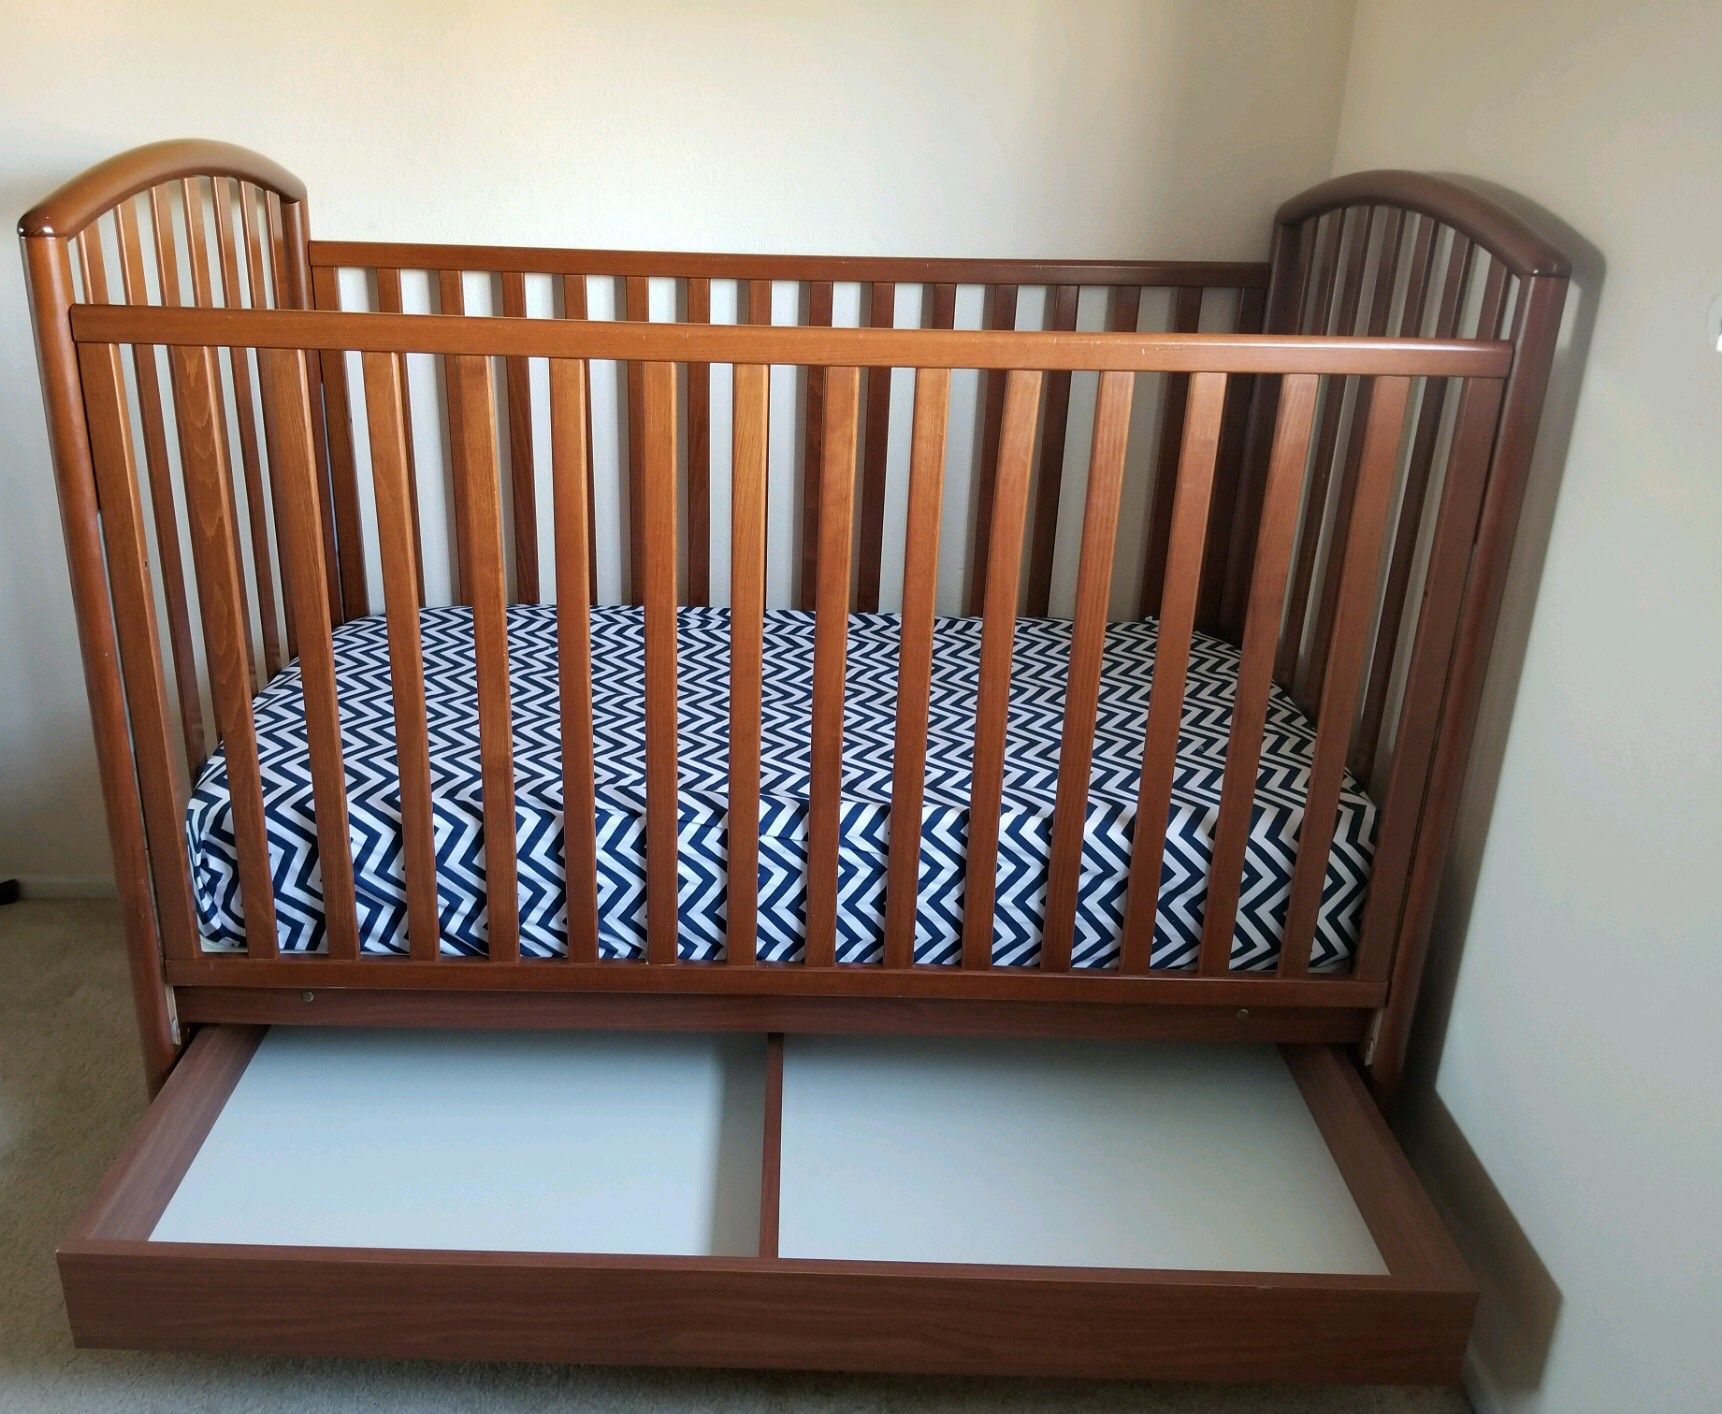 Crib and bouncy seat